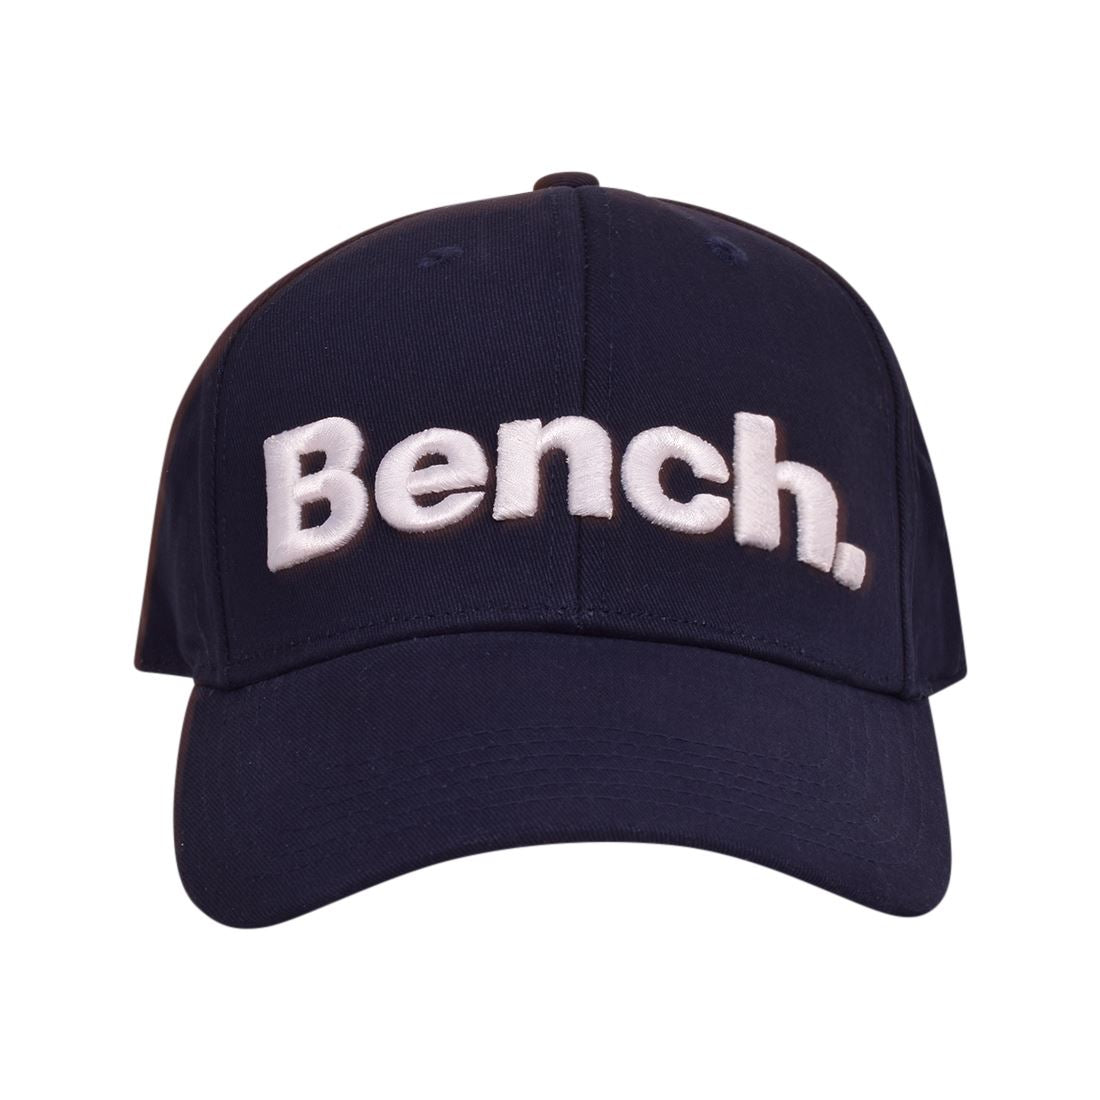 Unisex Bench Embroidered Baseball Cap Adjustable Hook And Loop Back Strap Cotton